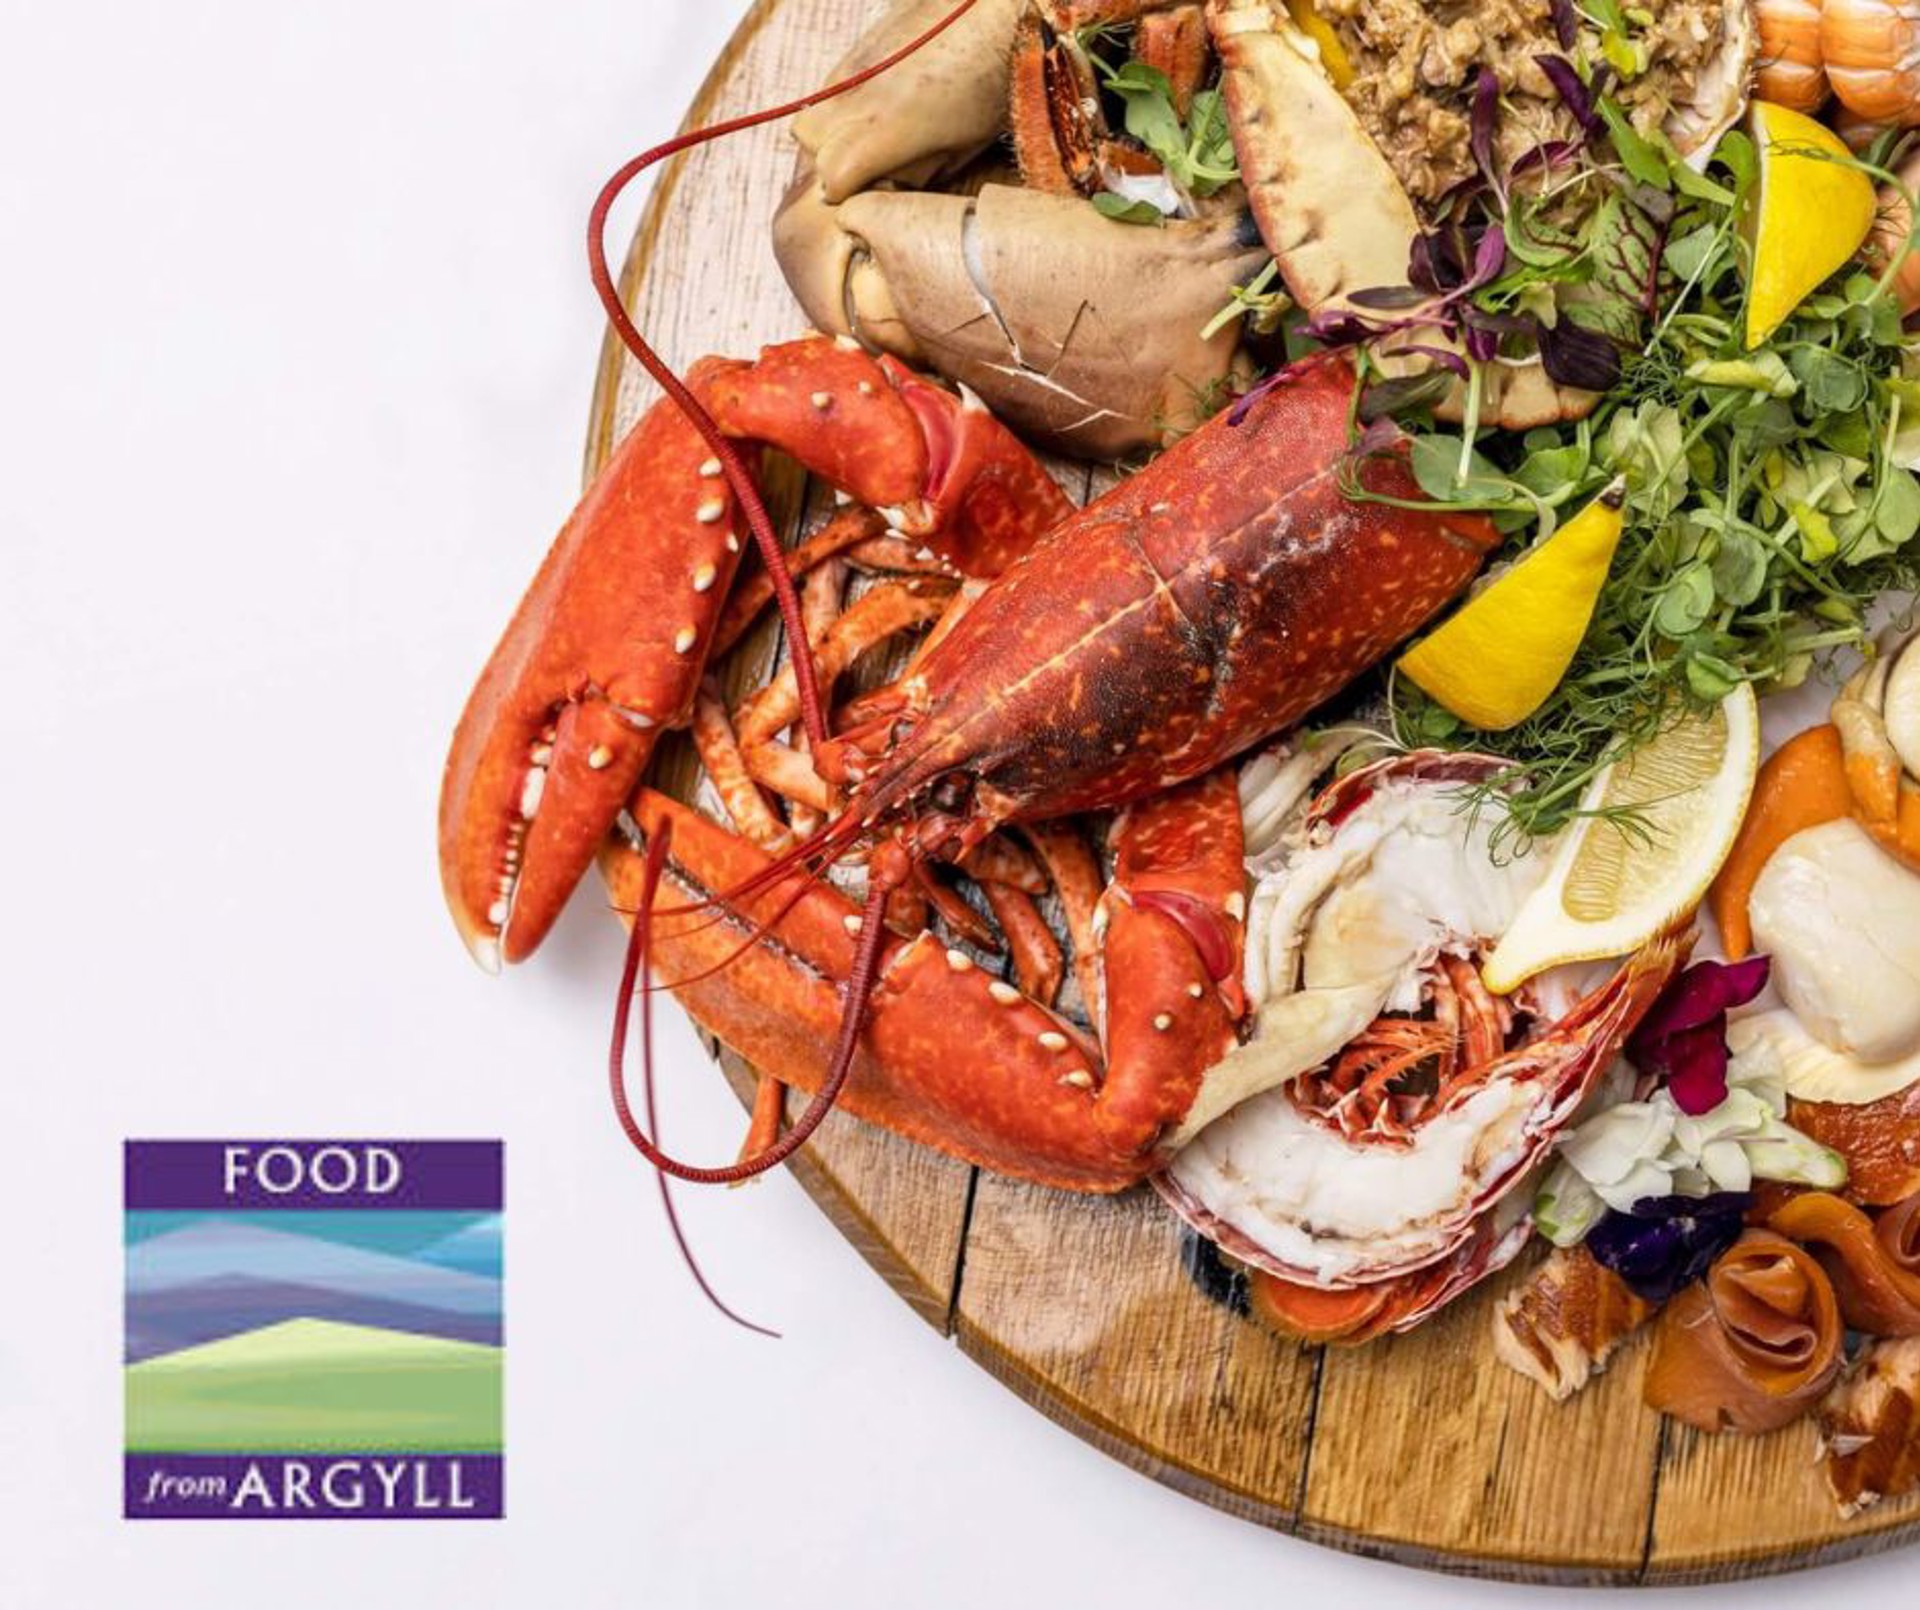 Background image - Food From Argyll Signpost